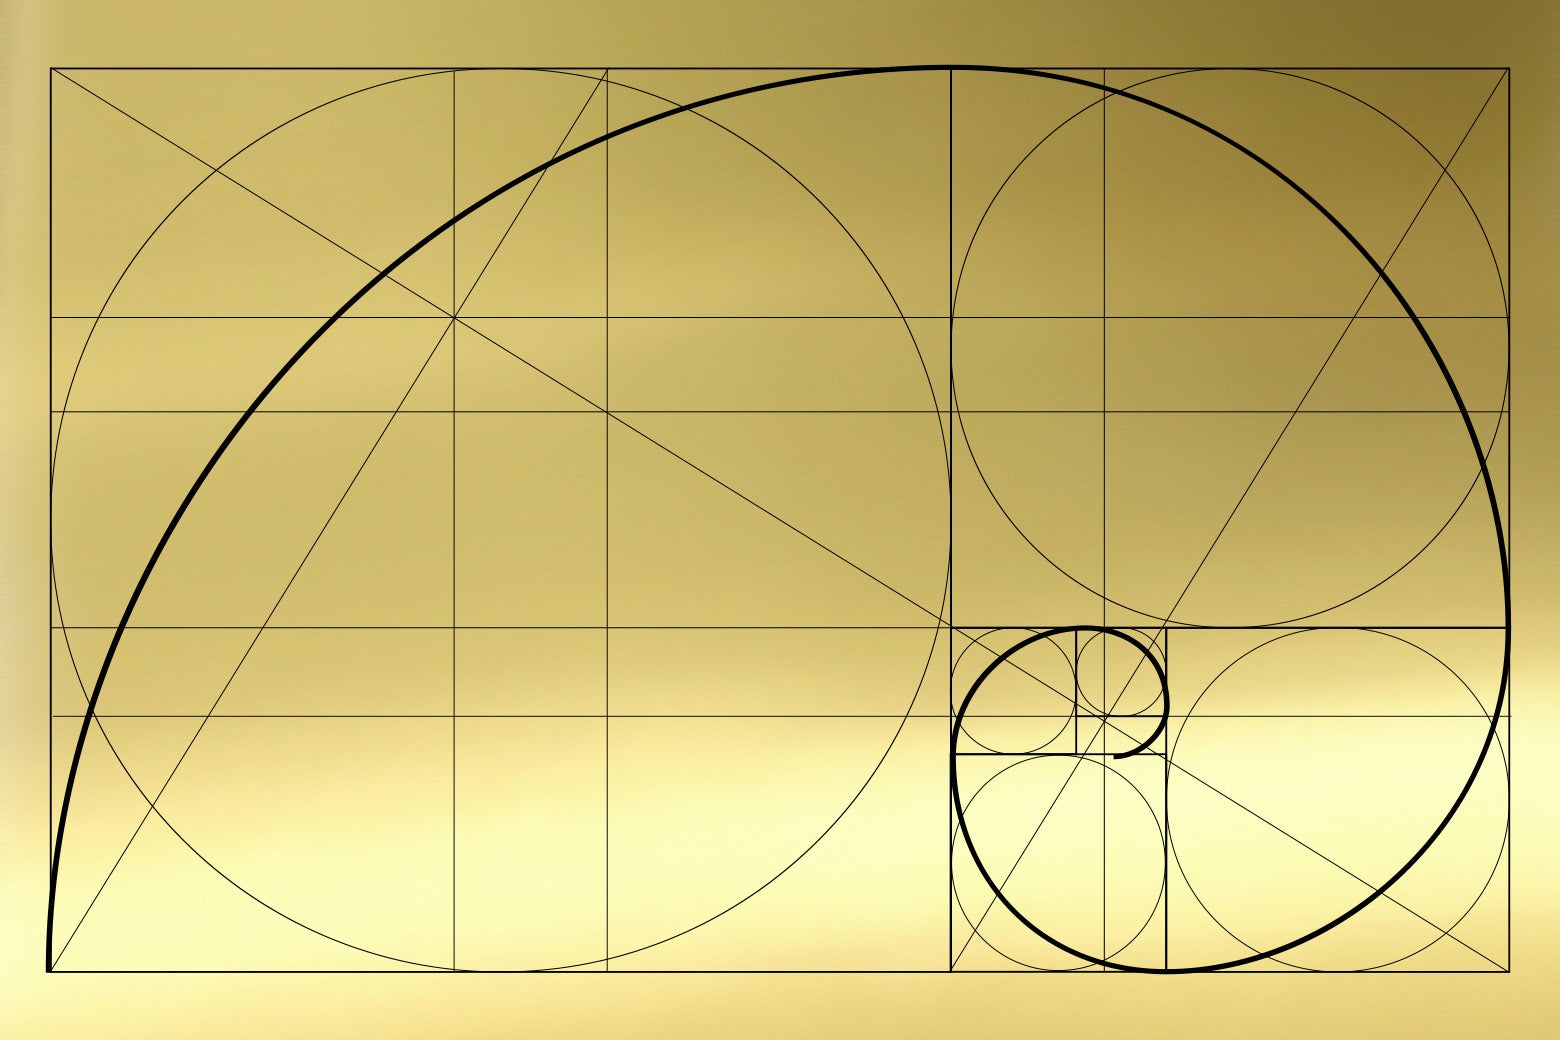 A golden rectangle filled with the golden spiral.